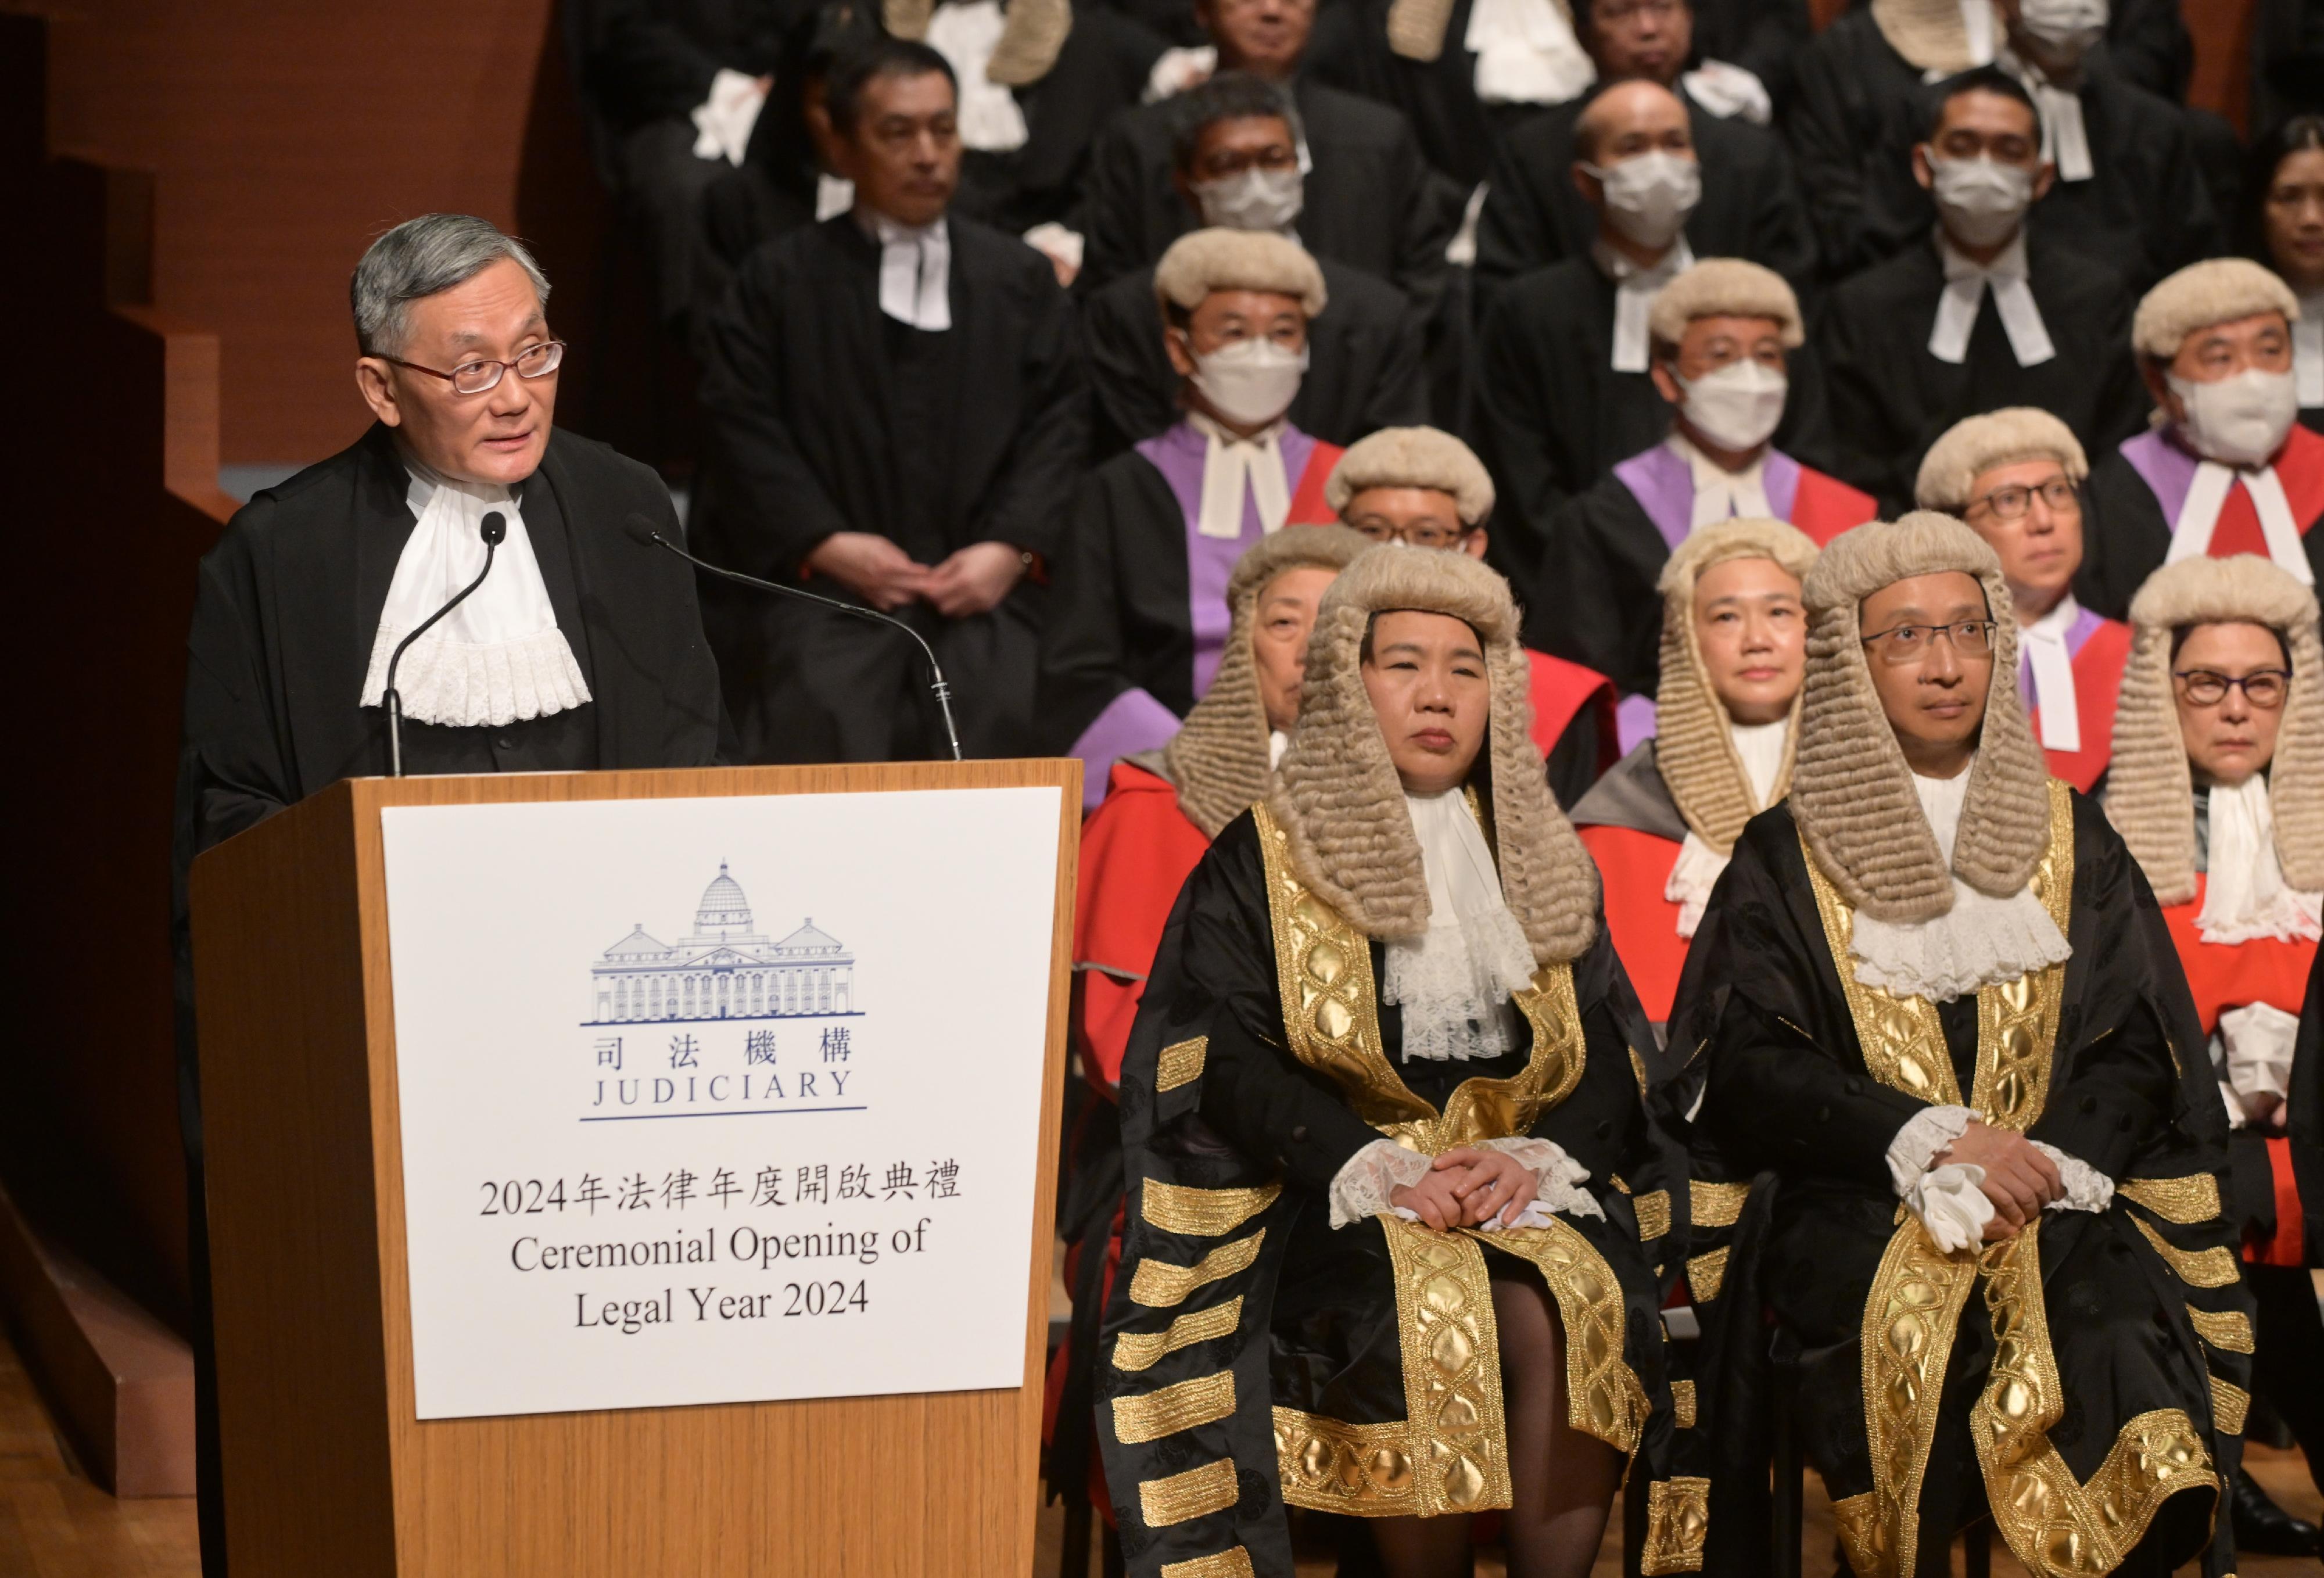 Chief Justice Andrew Cheung Kui-nung, Chief Justice of the Court of Final Appeal, today (January 22) gives an address at the Ceremonial Opening of the Legal Year 2024.

